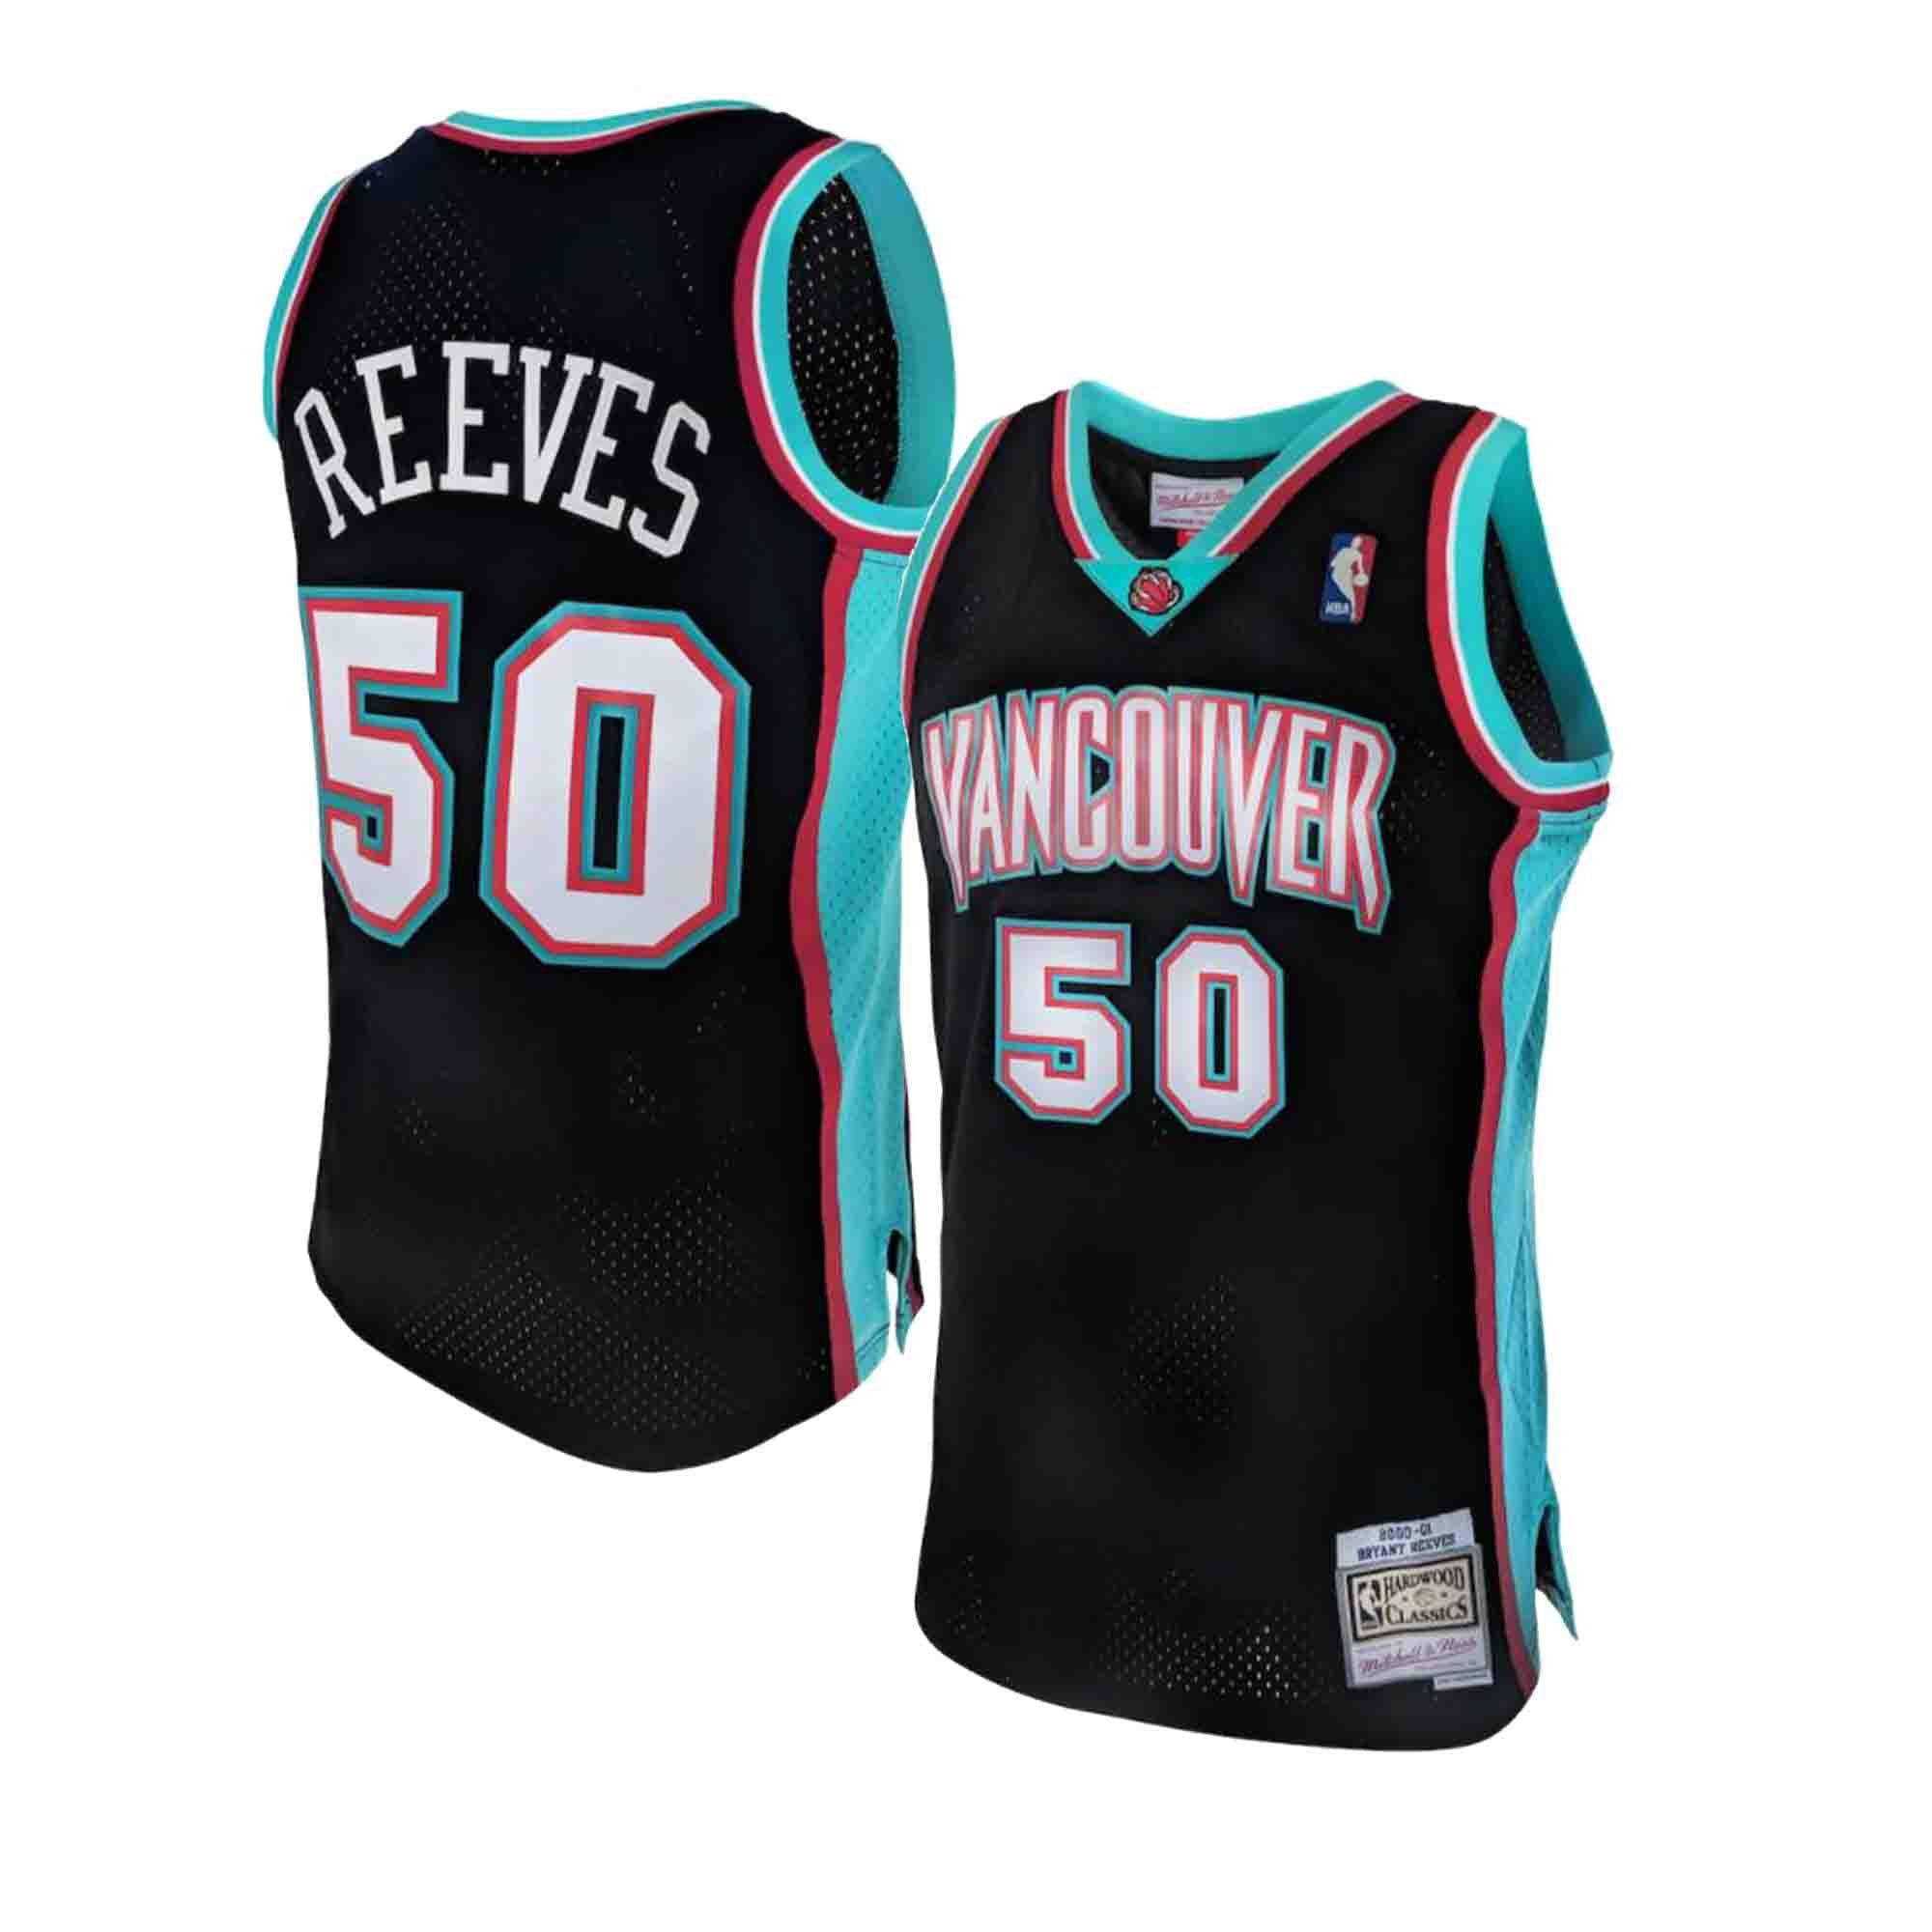 Vancouver Grizzlies Green NBA Jerseys for sale